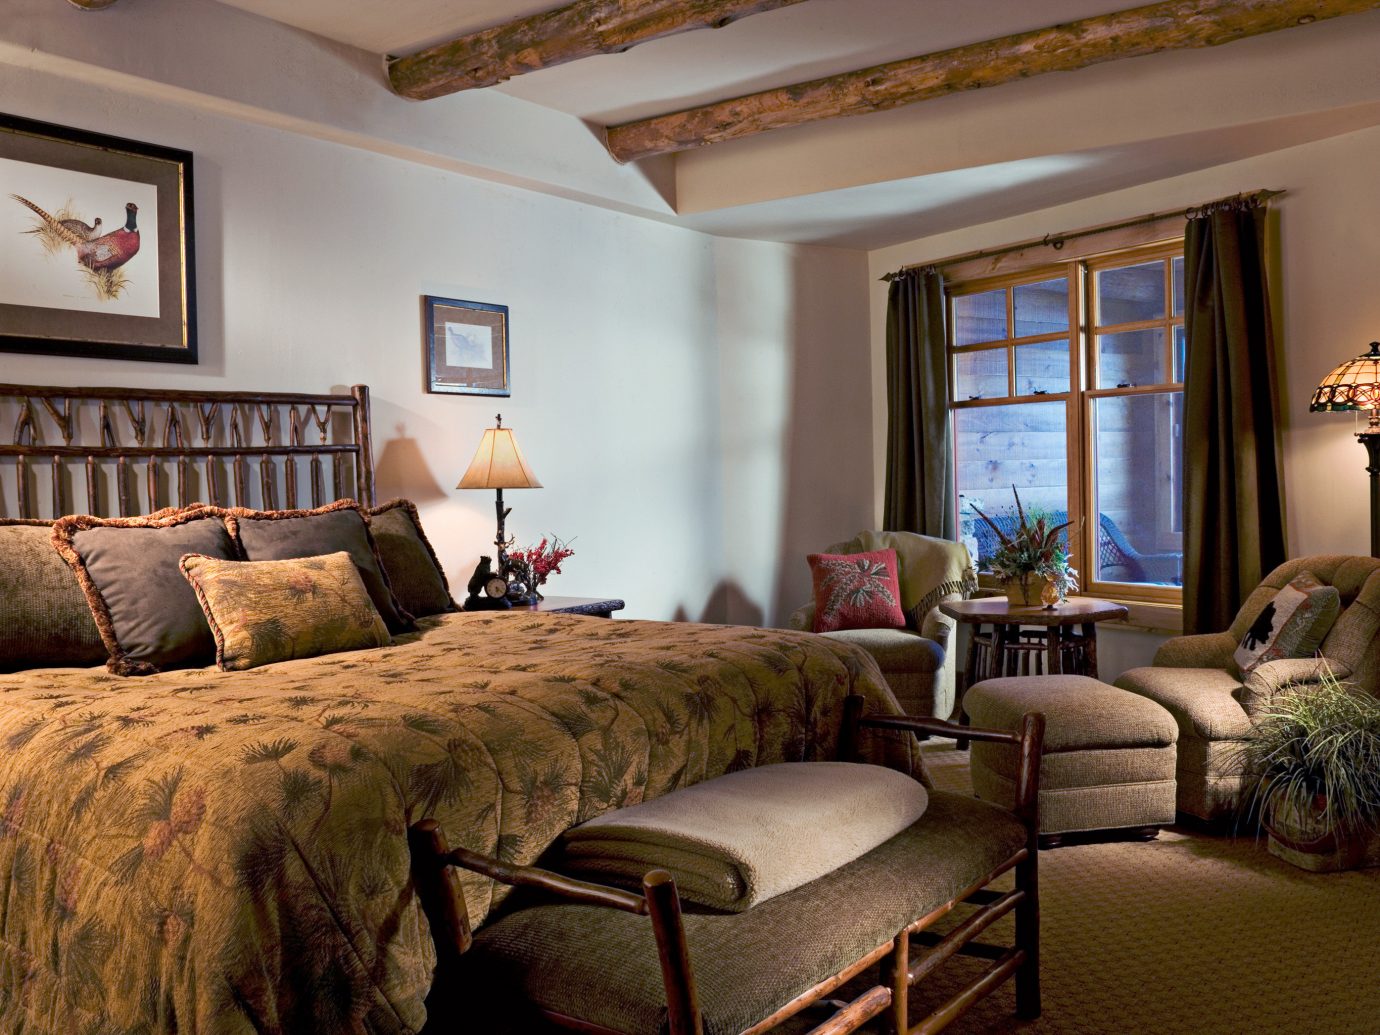 Bedroom Country Hotels Luxury New York Romantic Romantic Hotels Rustic Suite indoor wall sofa room floor ceiling window Living property estate living room home cottage interior design real estate hardwood decorated furniture farmhouse Villa